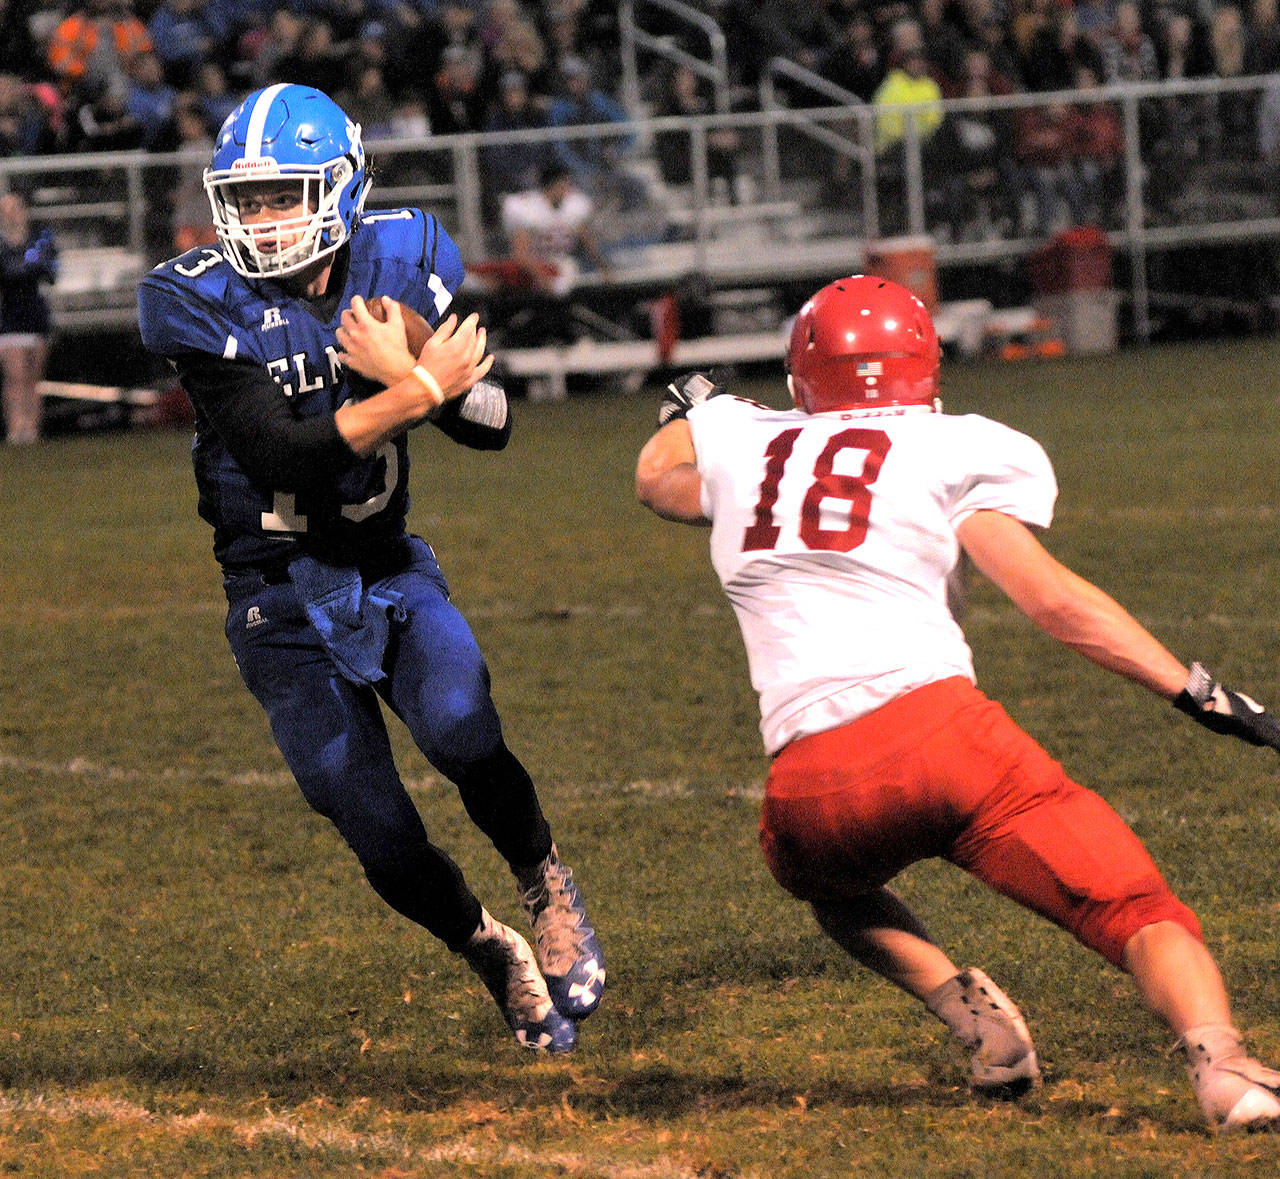 Elma’s Cody Vollan, left, jukes Castle Rock’s Peyton Watts on a touchdown run in the first quarter of the Eagles’ 47-21 win on Friday in Elma.(Hasani Grayson | The Daily World)